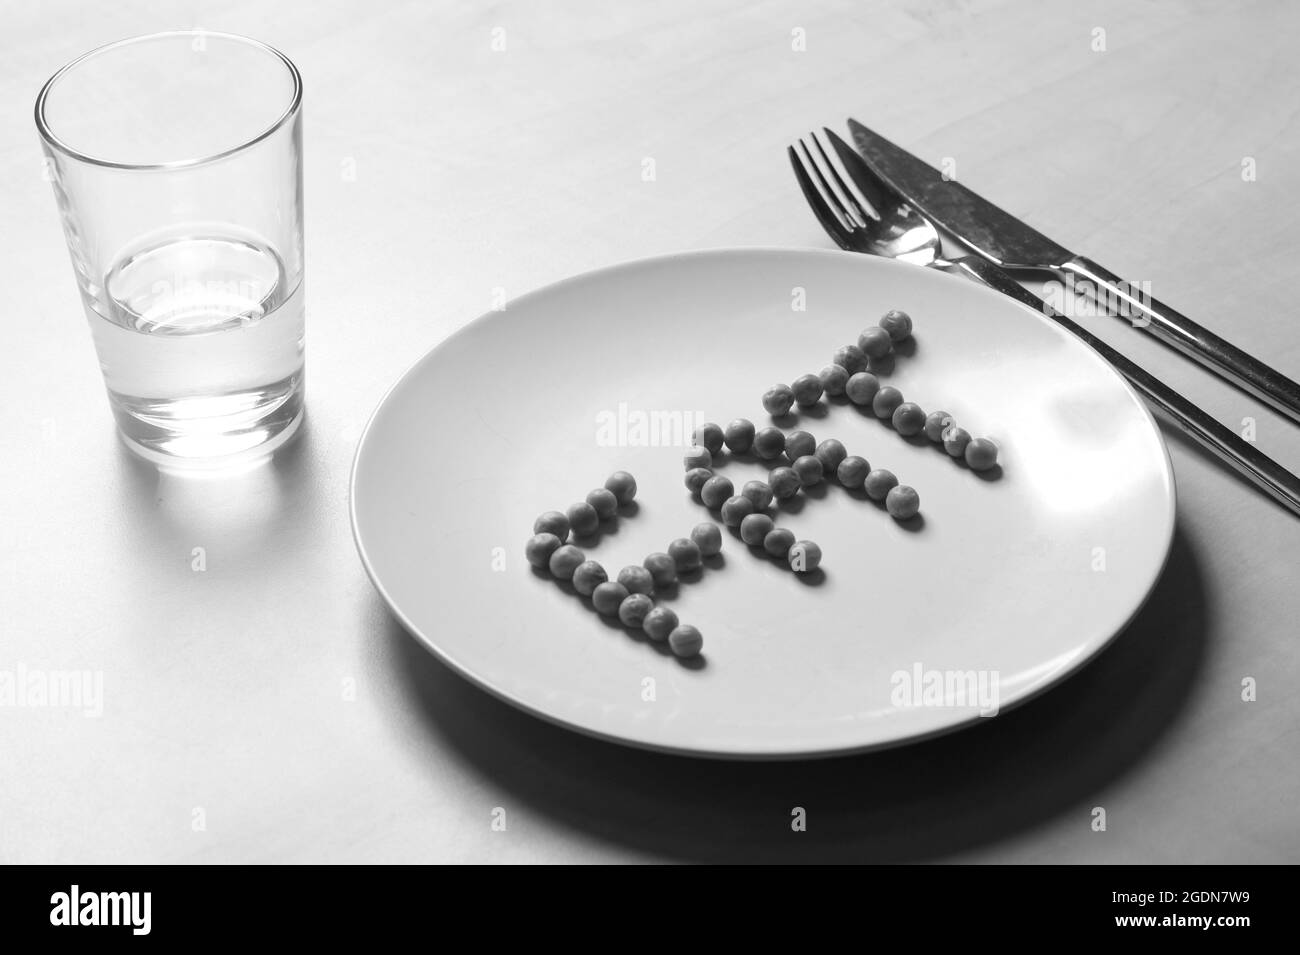 Anorexia. FAT spelt out with peas on a plate. Stock Photo